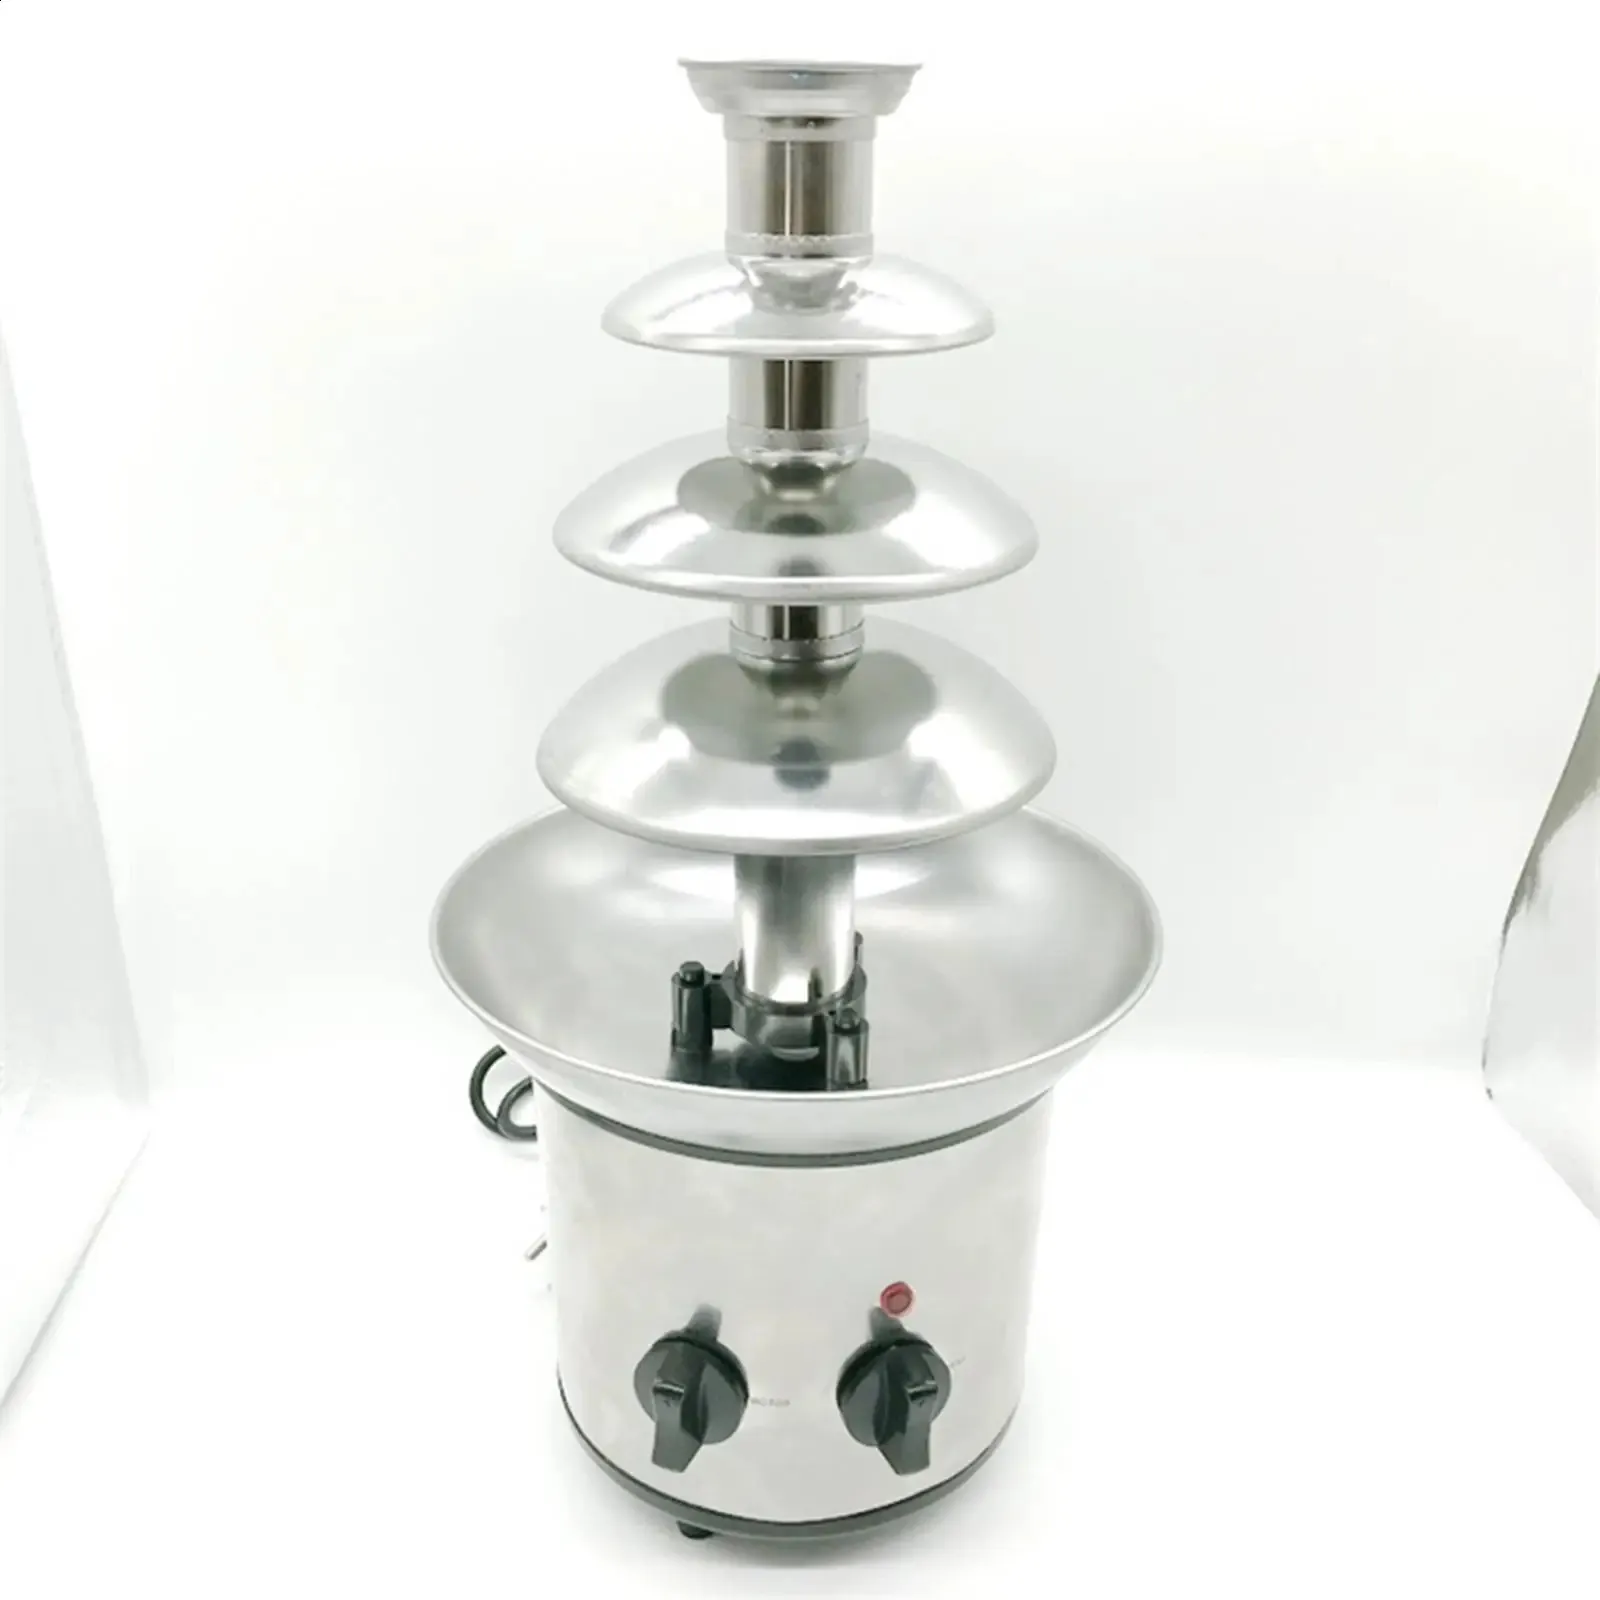 4 Layers Stainless Steel Chocolate Fountain Creative Design Chocolate with Heating Fondue Machine DIY Waterfall for Party